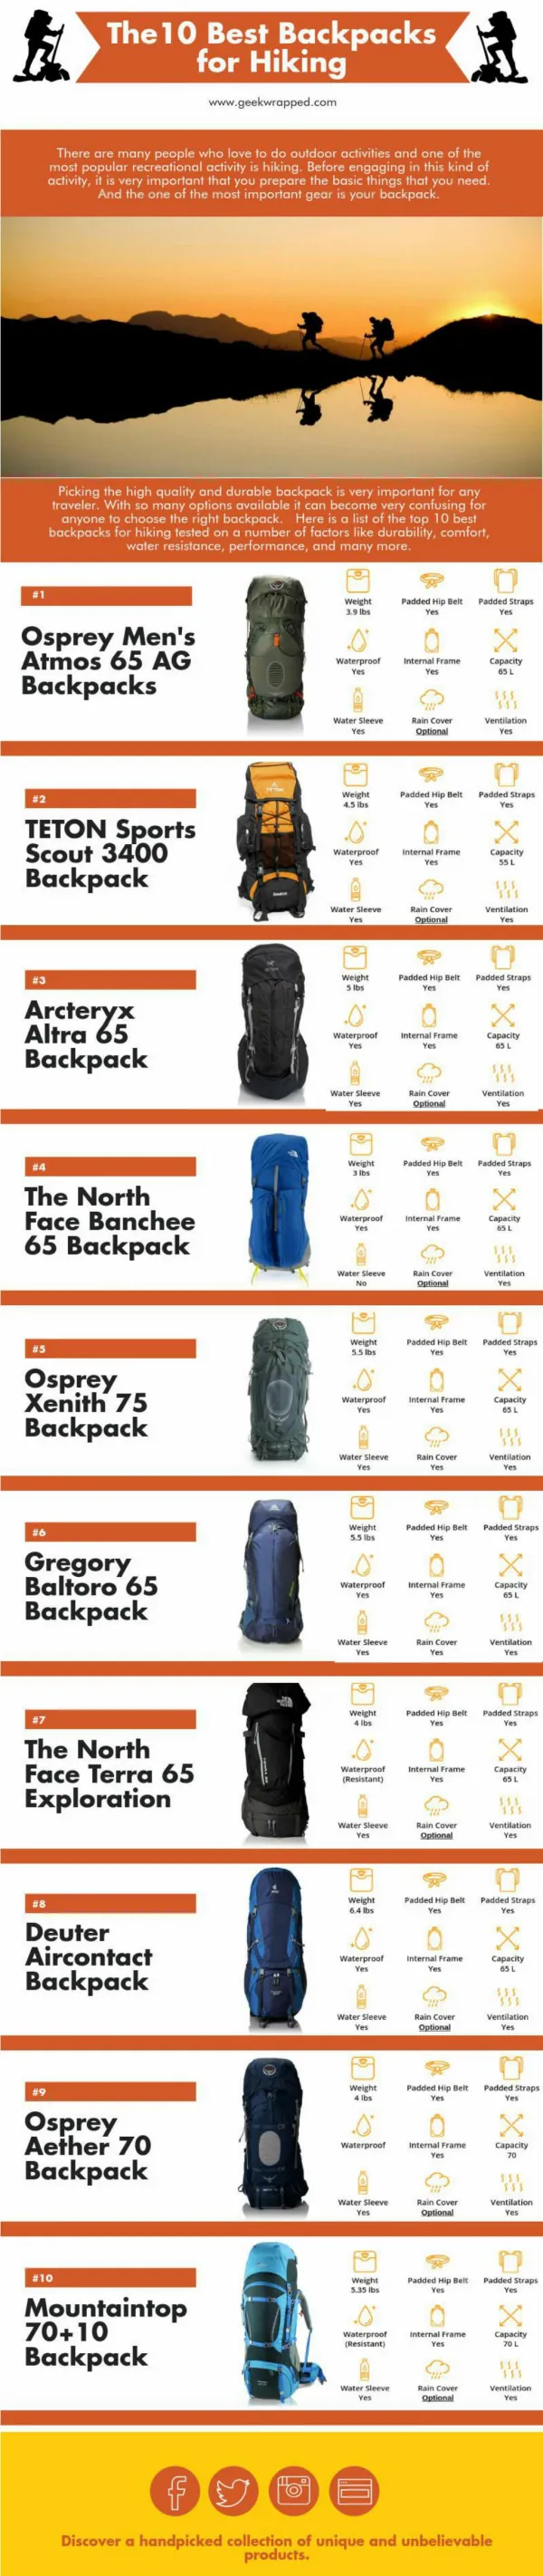 The 10 Best Backpacks for Hiking